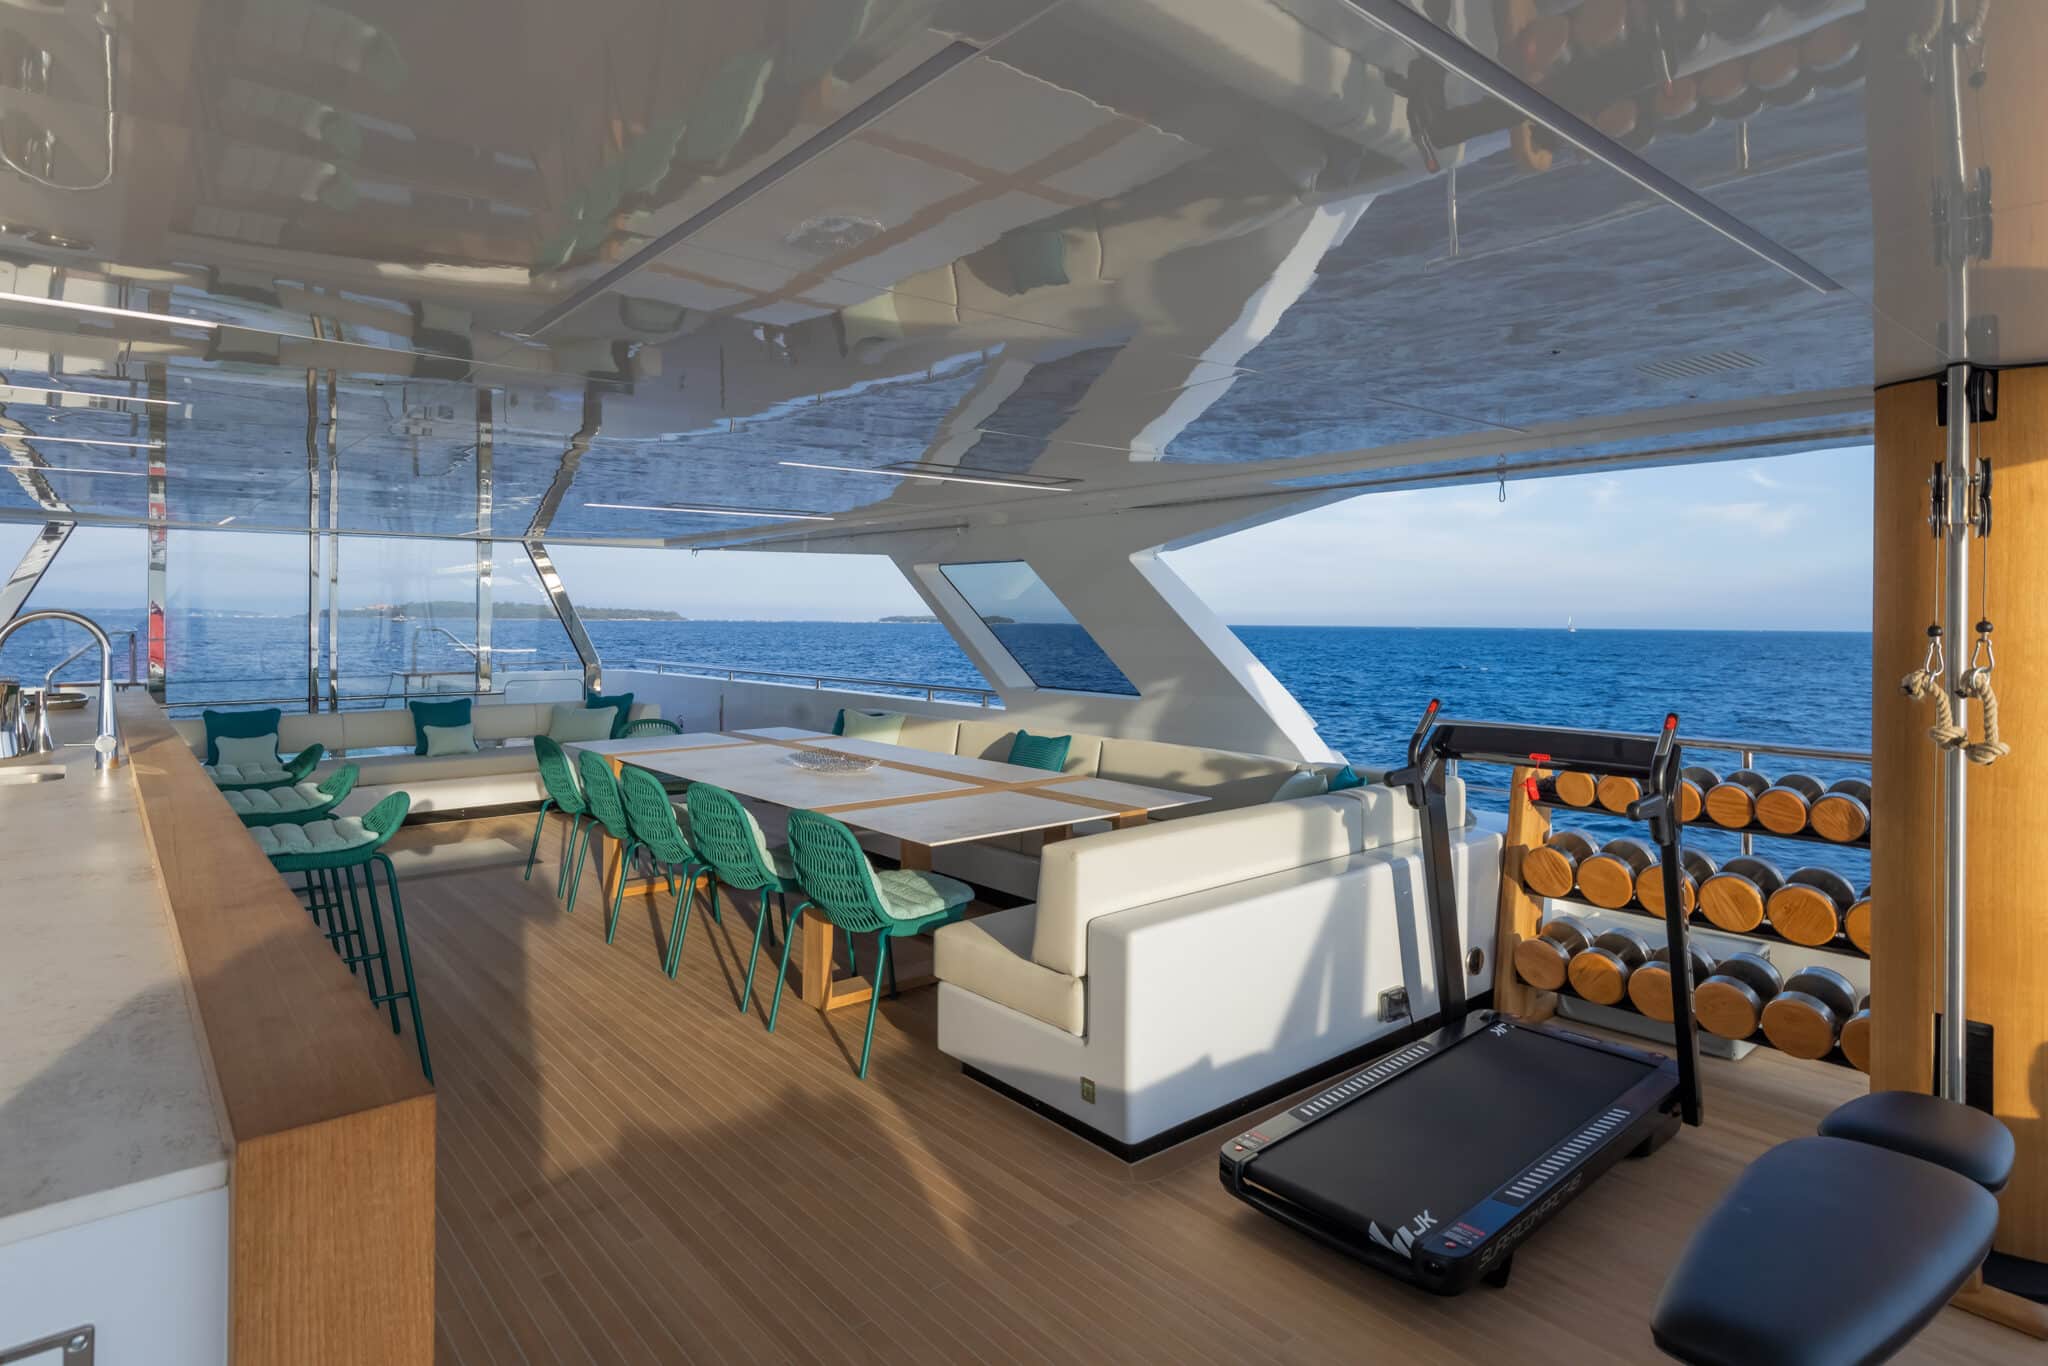 Emocean by Rosetti Super Yacht - RSY 38M EXP EMOCEAN Sundeck 01 scaled 141